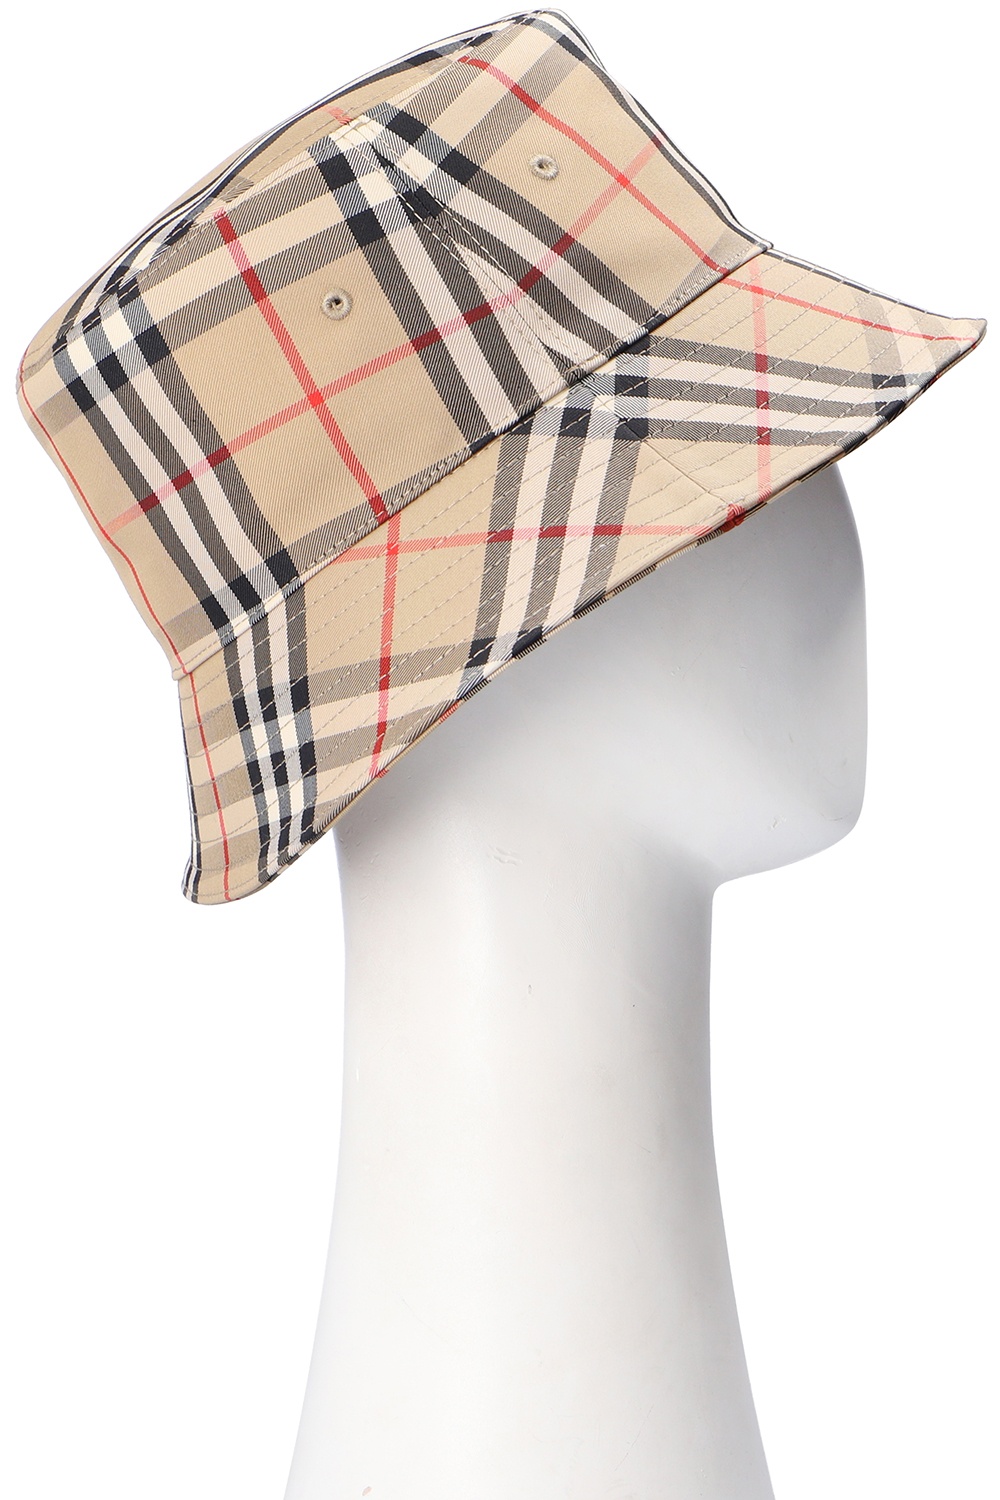 Ladies Navy Winter Felt Hat with Lace - Checked hat Burberry - IetpShops  Norway